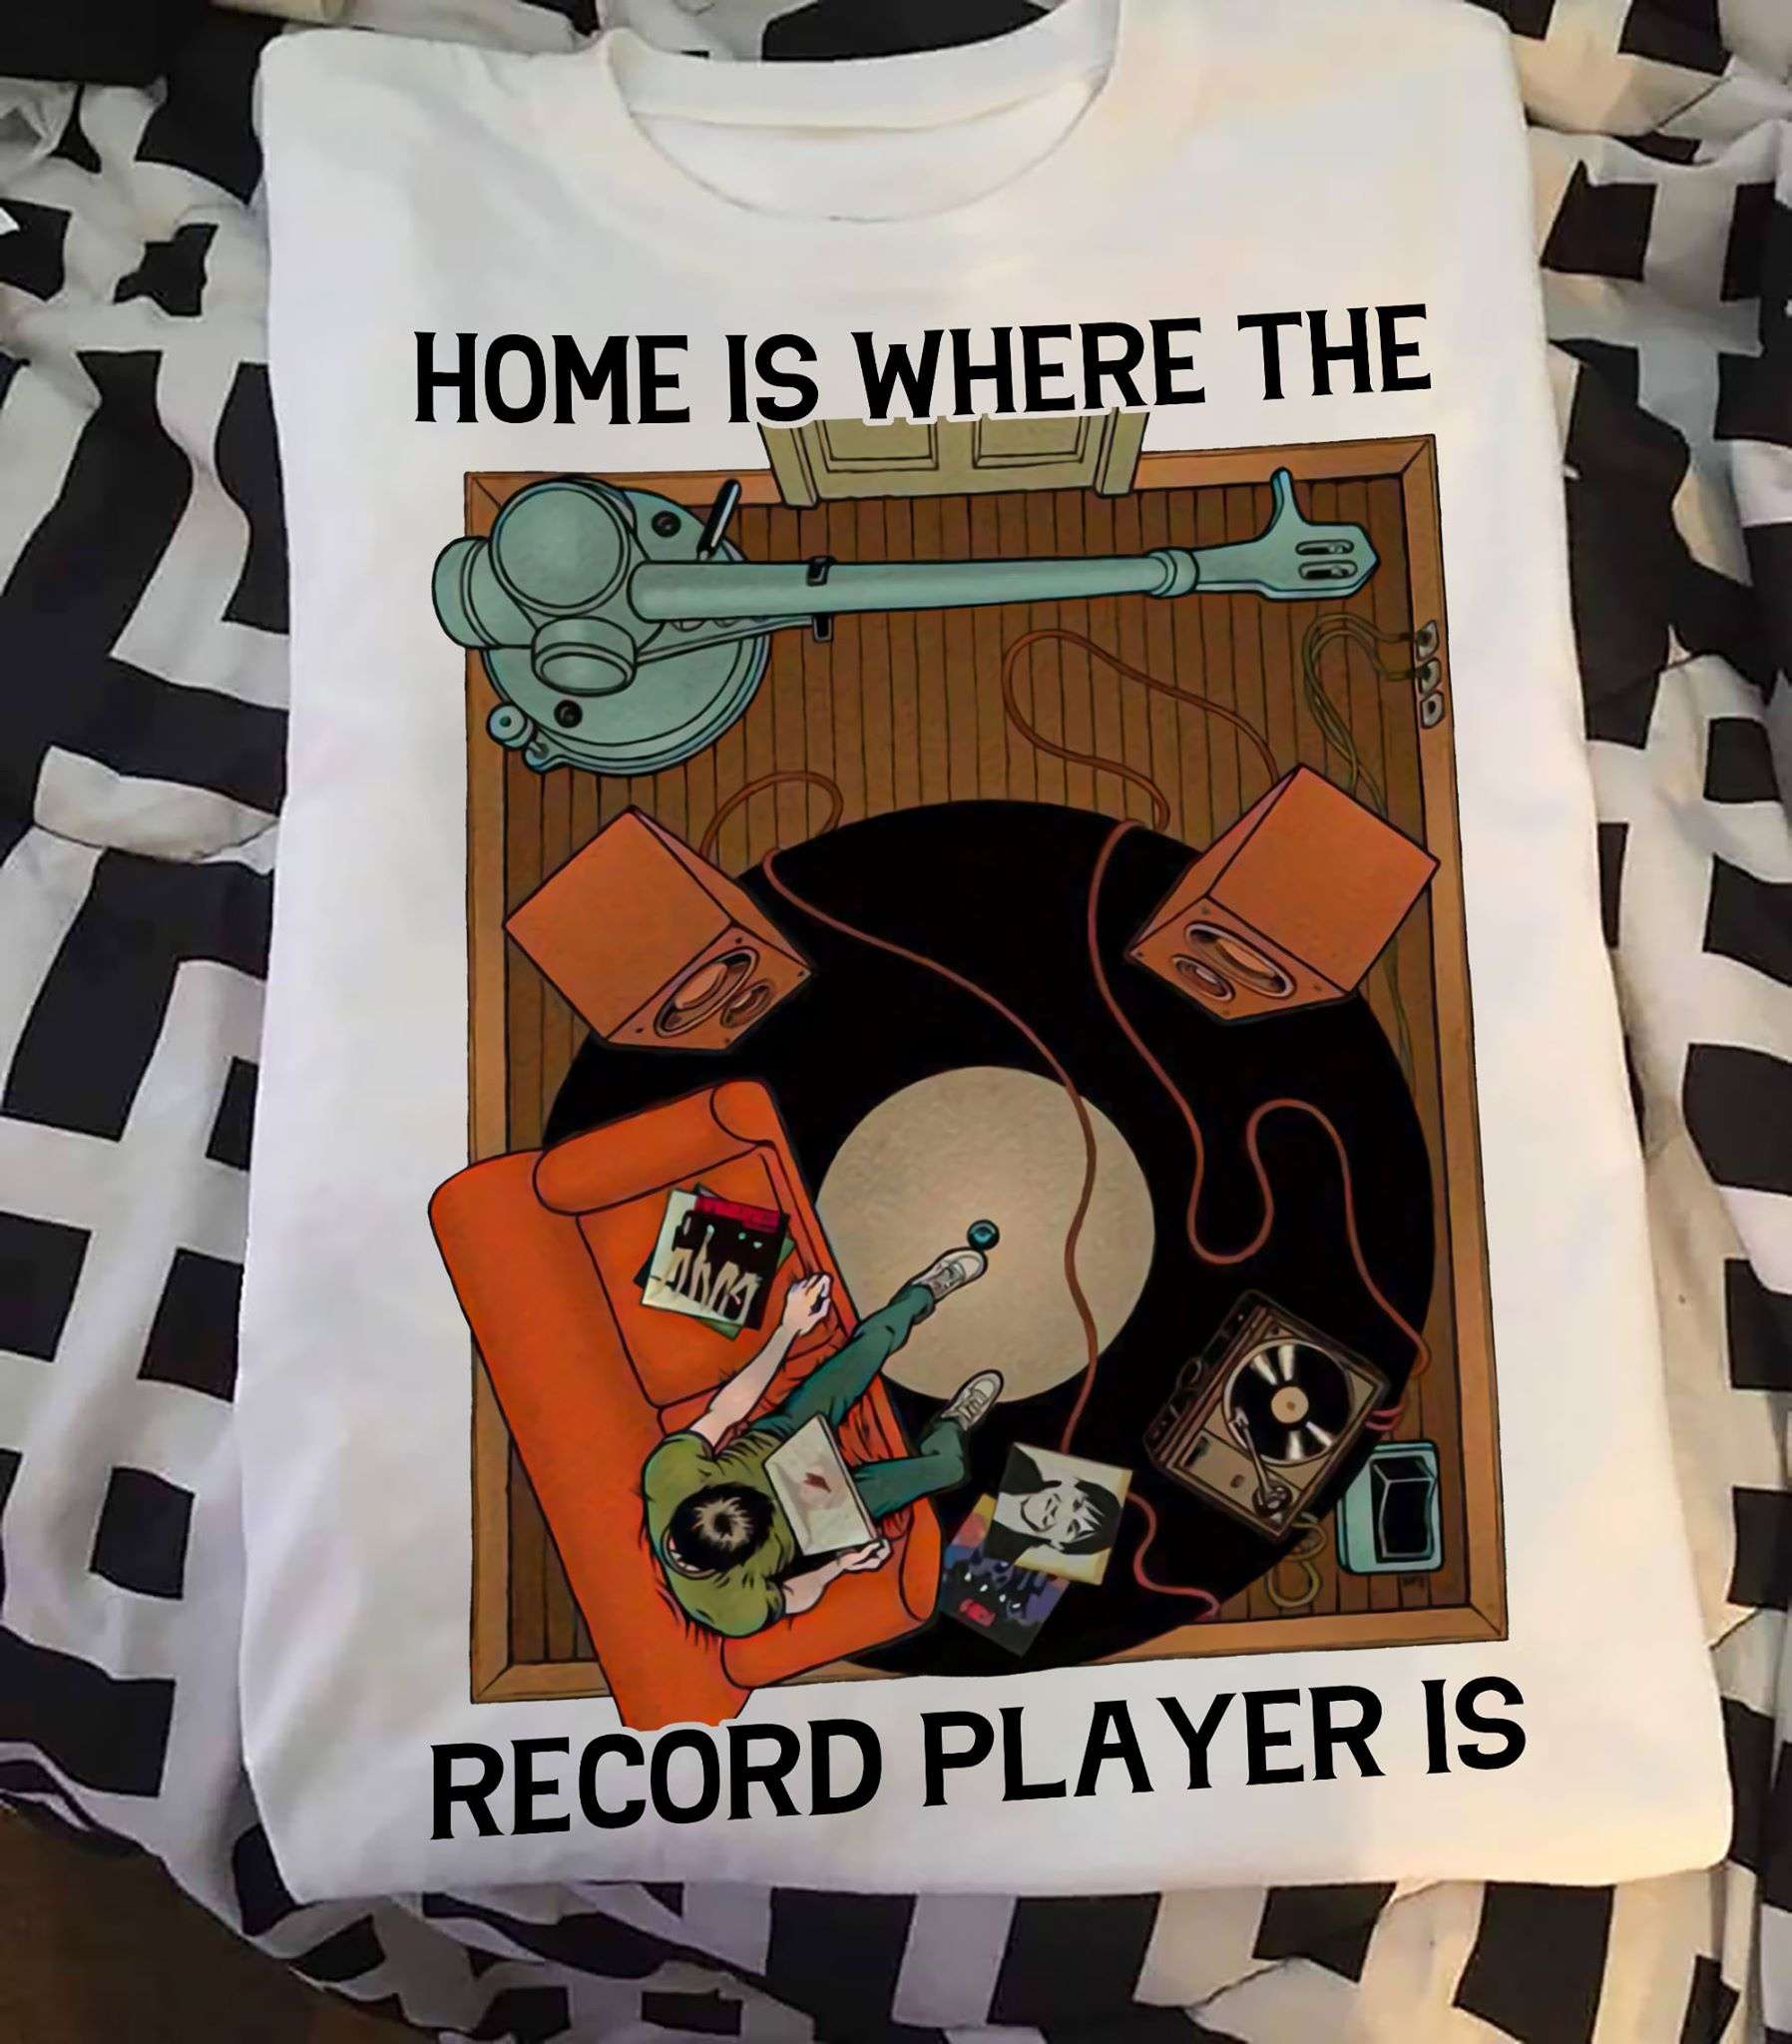 Home is where the record player is - Listening to vinyl record, vinyl record player